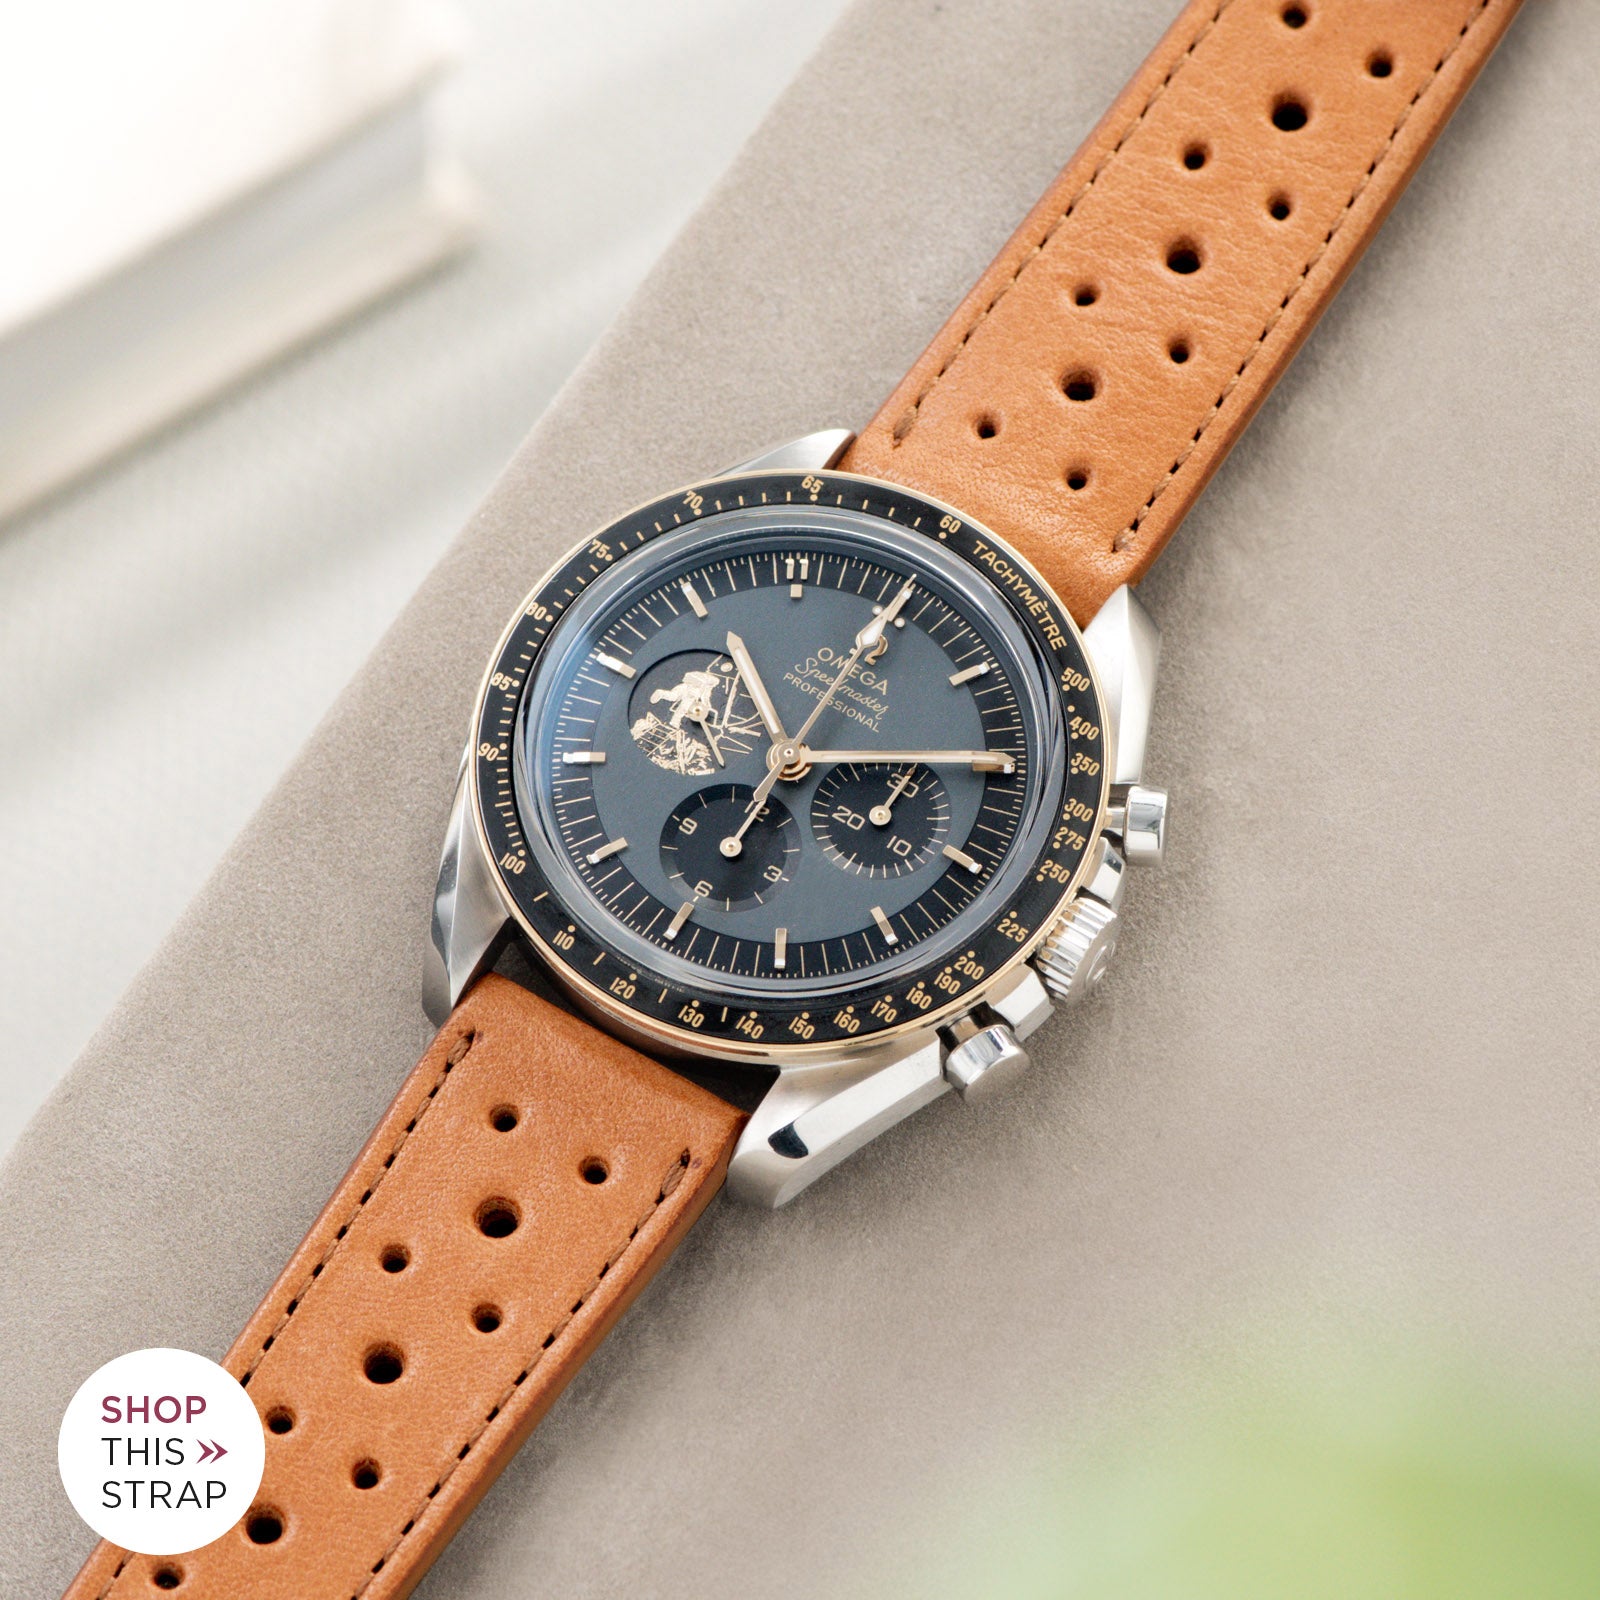 Bulang and Sons_Strap Guide_Omega Speedmaster Apollo 11 50TH Anniversary Watch_Racing Caramel Brown Leather Watch Strap